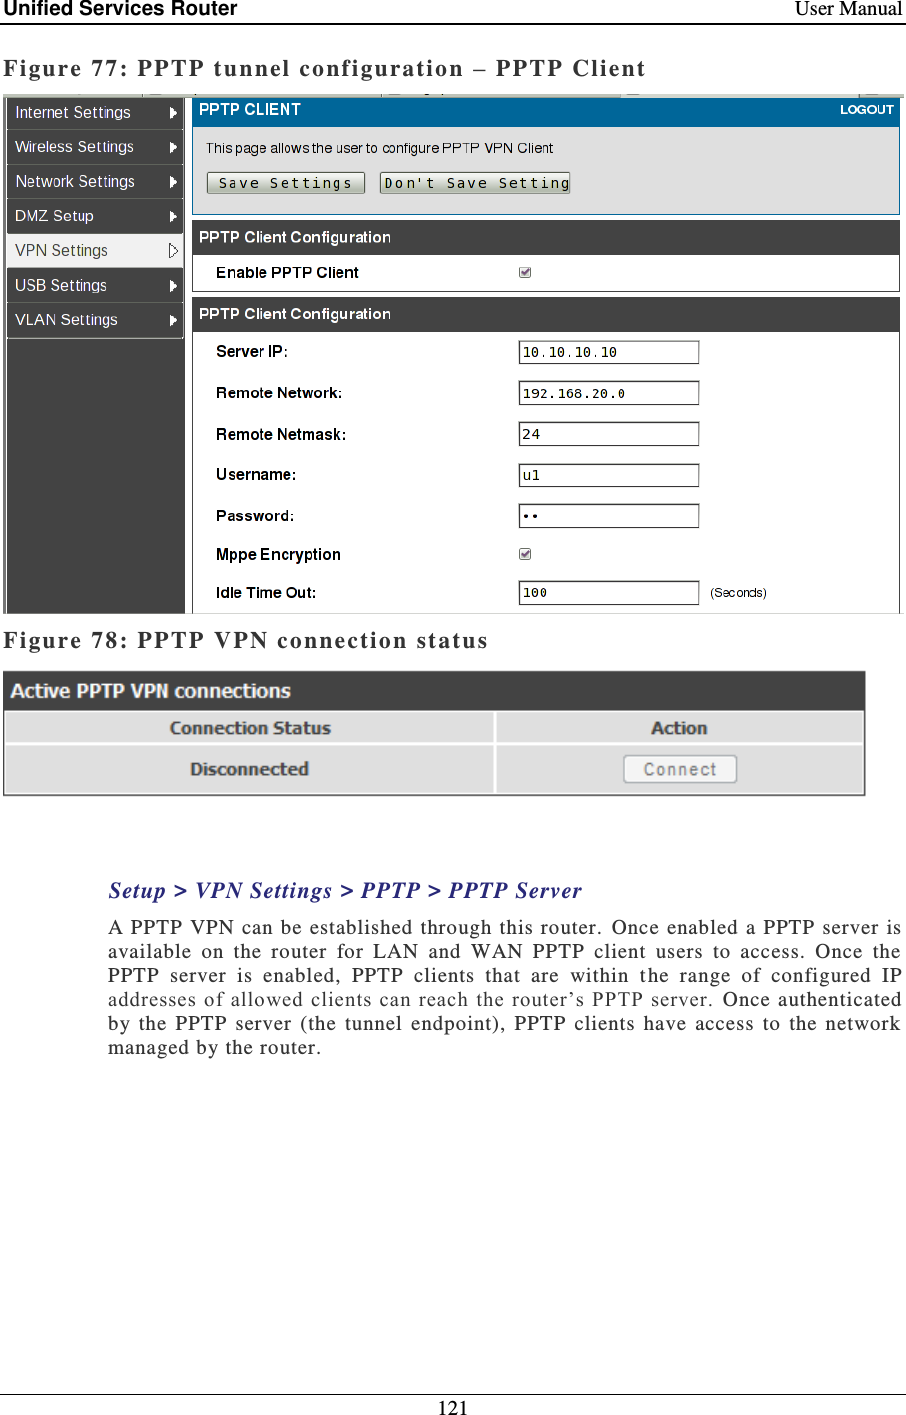 Unified Services Router    User Manual 121  Figure 77: PPTP tunnel configuratio n  –  PPTP Client  Figure 78: PPTP  VPN connection status   Setup &gt; VPN Settings &gt; PPTP &gt; PPTP Server A PPTP VPN  can be established through  this router.  Once  enabled  a PPTP  server  is available  on  the  router  for  LAN  and  WAN  PPTP  client  users  to  access.  Once  the PPTP  server  is  enabled,  PPTP  clients  that  are  within  t he  range  of  configured  IP addresses of allowed clients can  reach  the router’s  PPTP server.  Once authenticated by  the  PPTP  server  (the  tunnel  endpoint),  PPTP  clients  have  access  to  the  network managed by the router.  